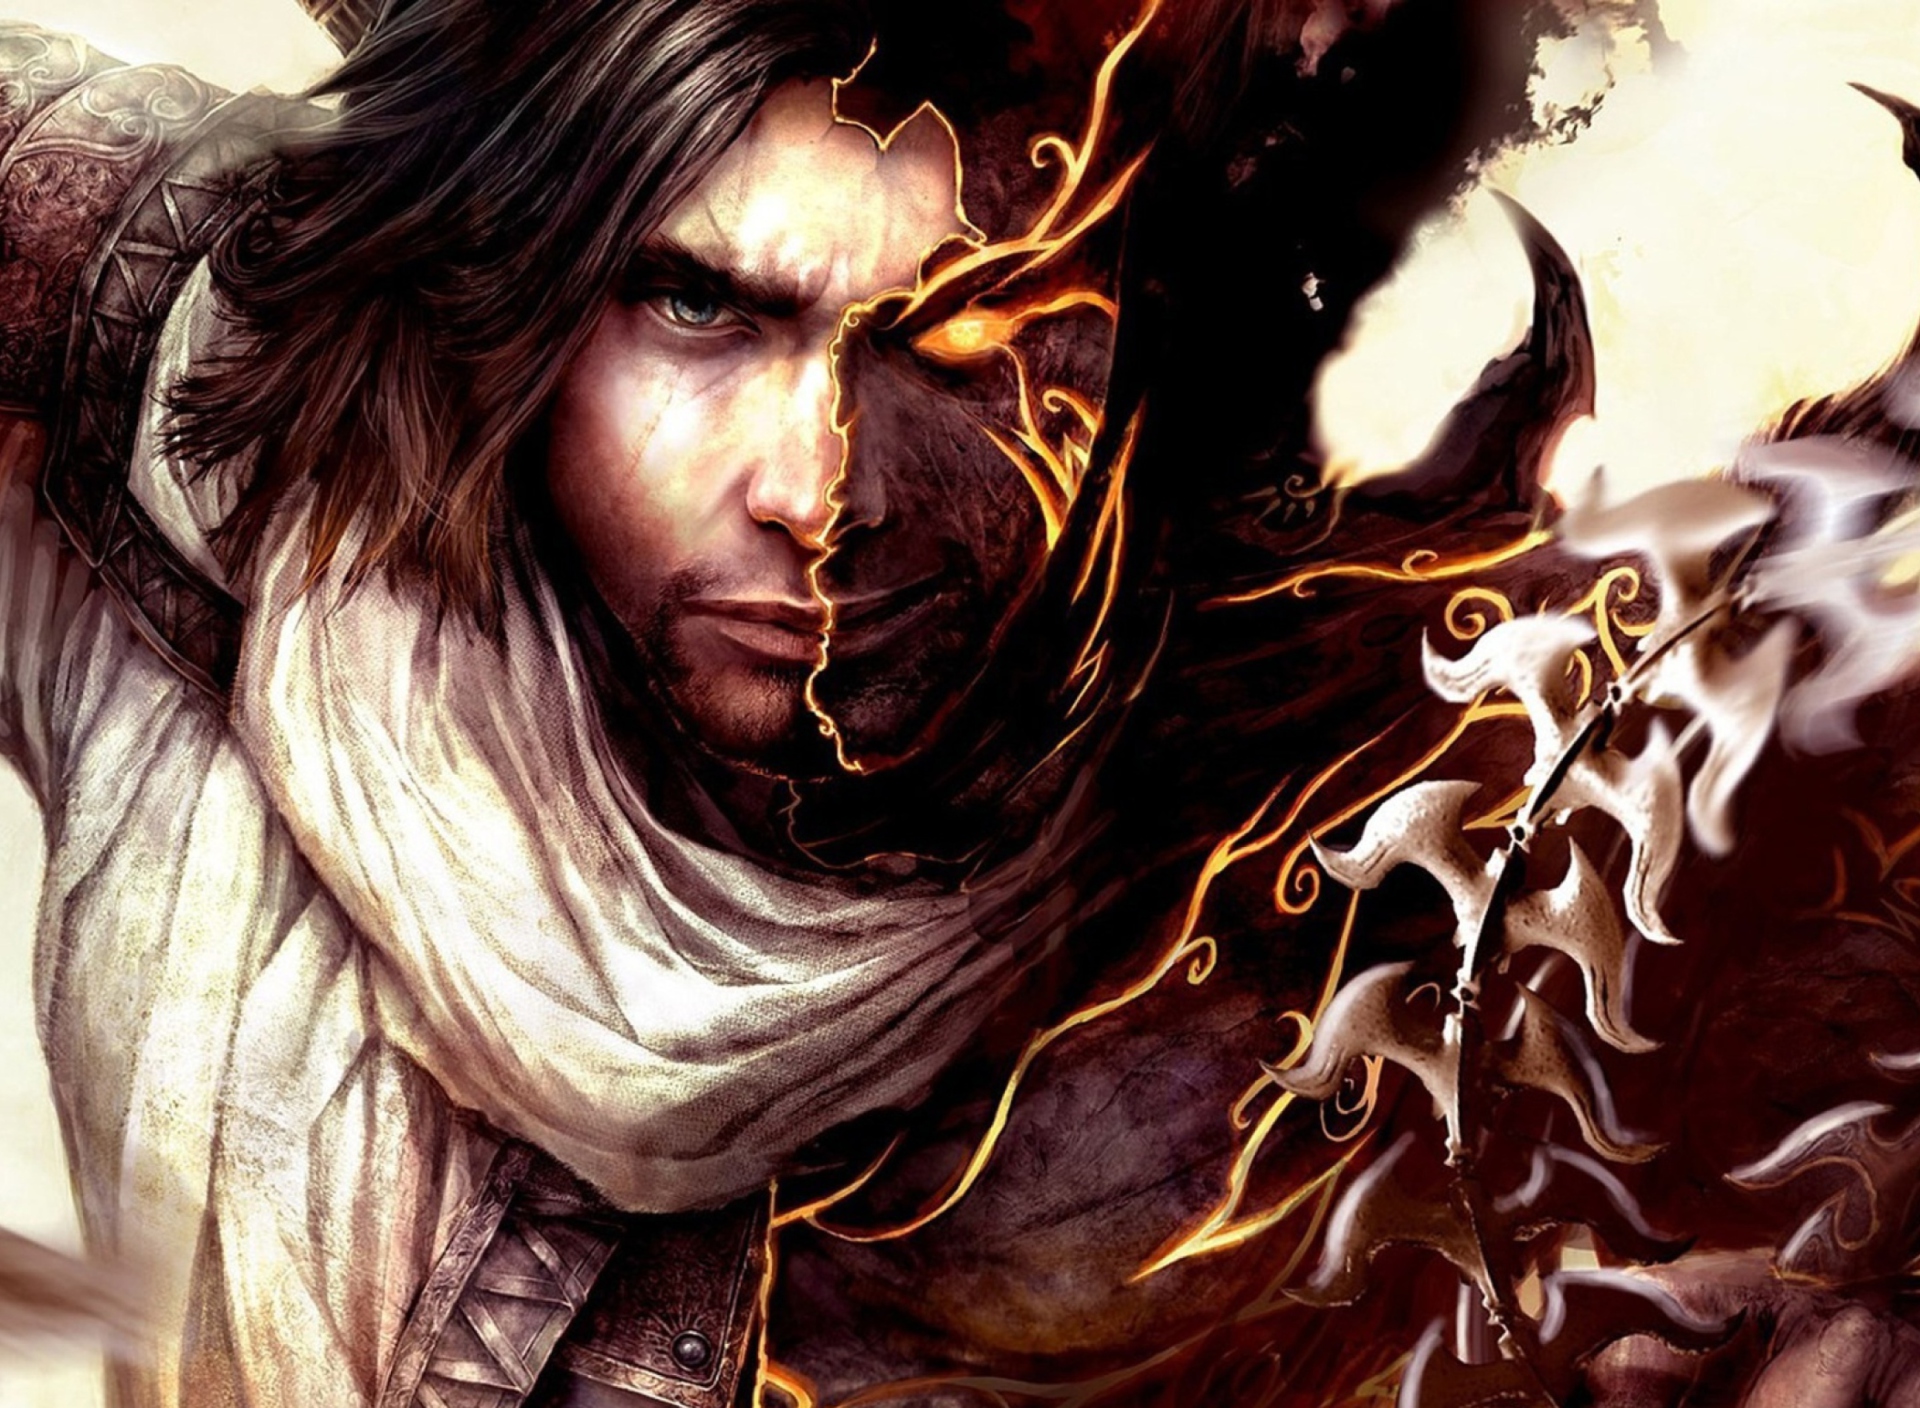 Prince Of Persia - The Two Thrones screenshot #1 1920x1408